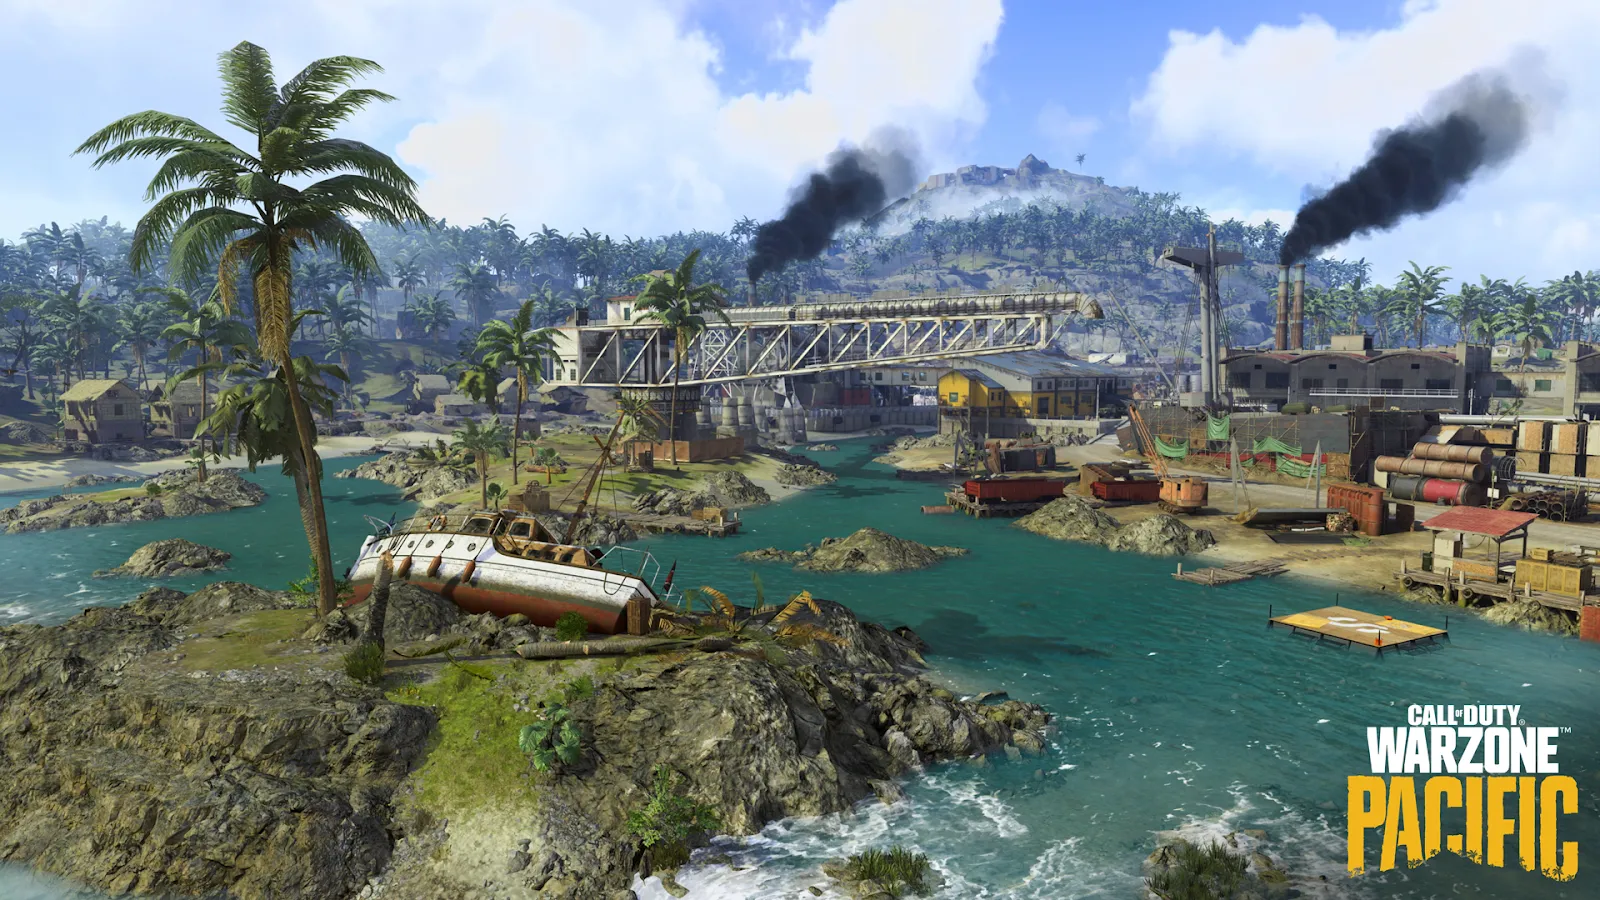 This tropical vibe just makes you want to play COD: Warzone all the time.